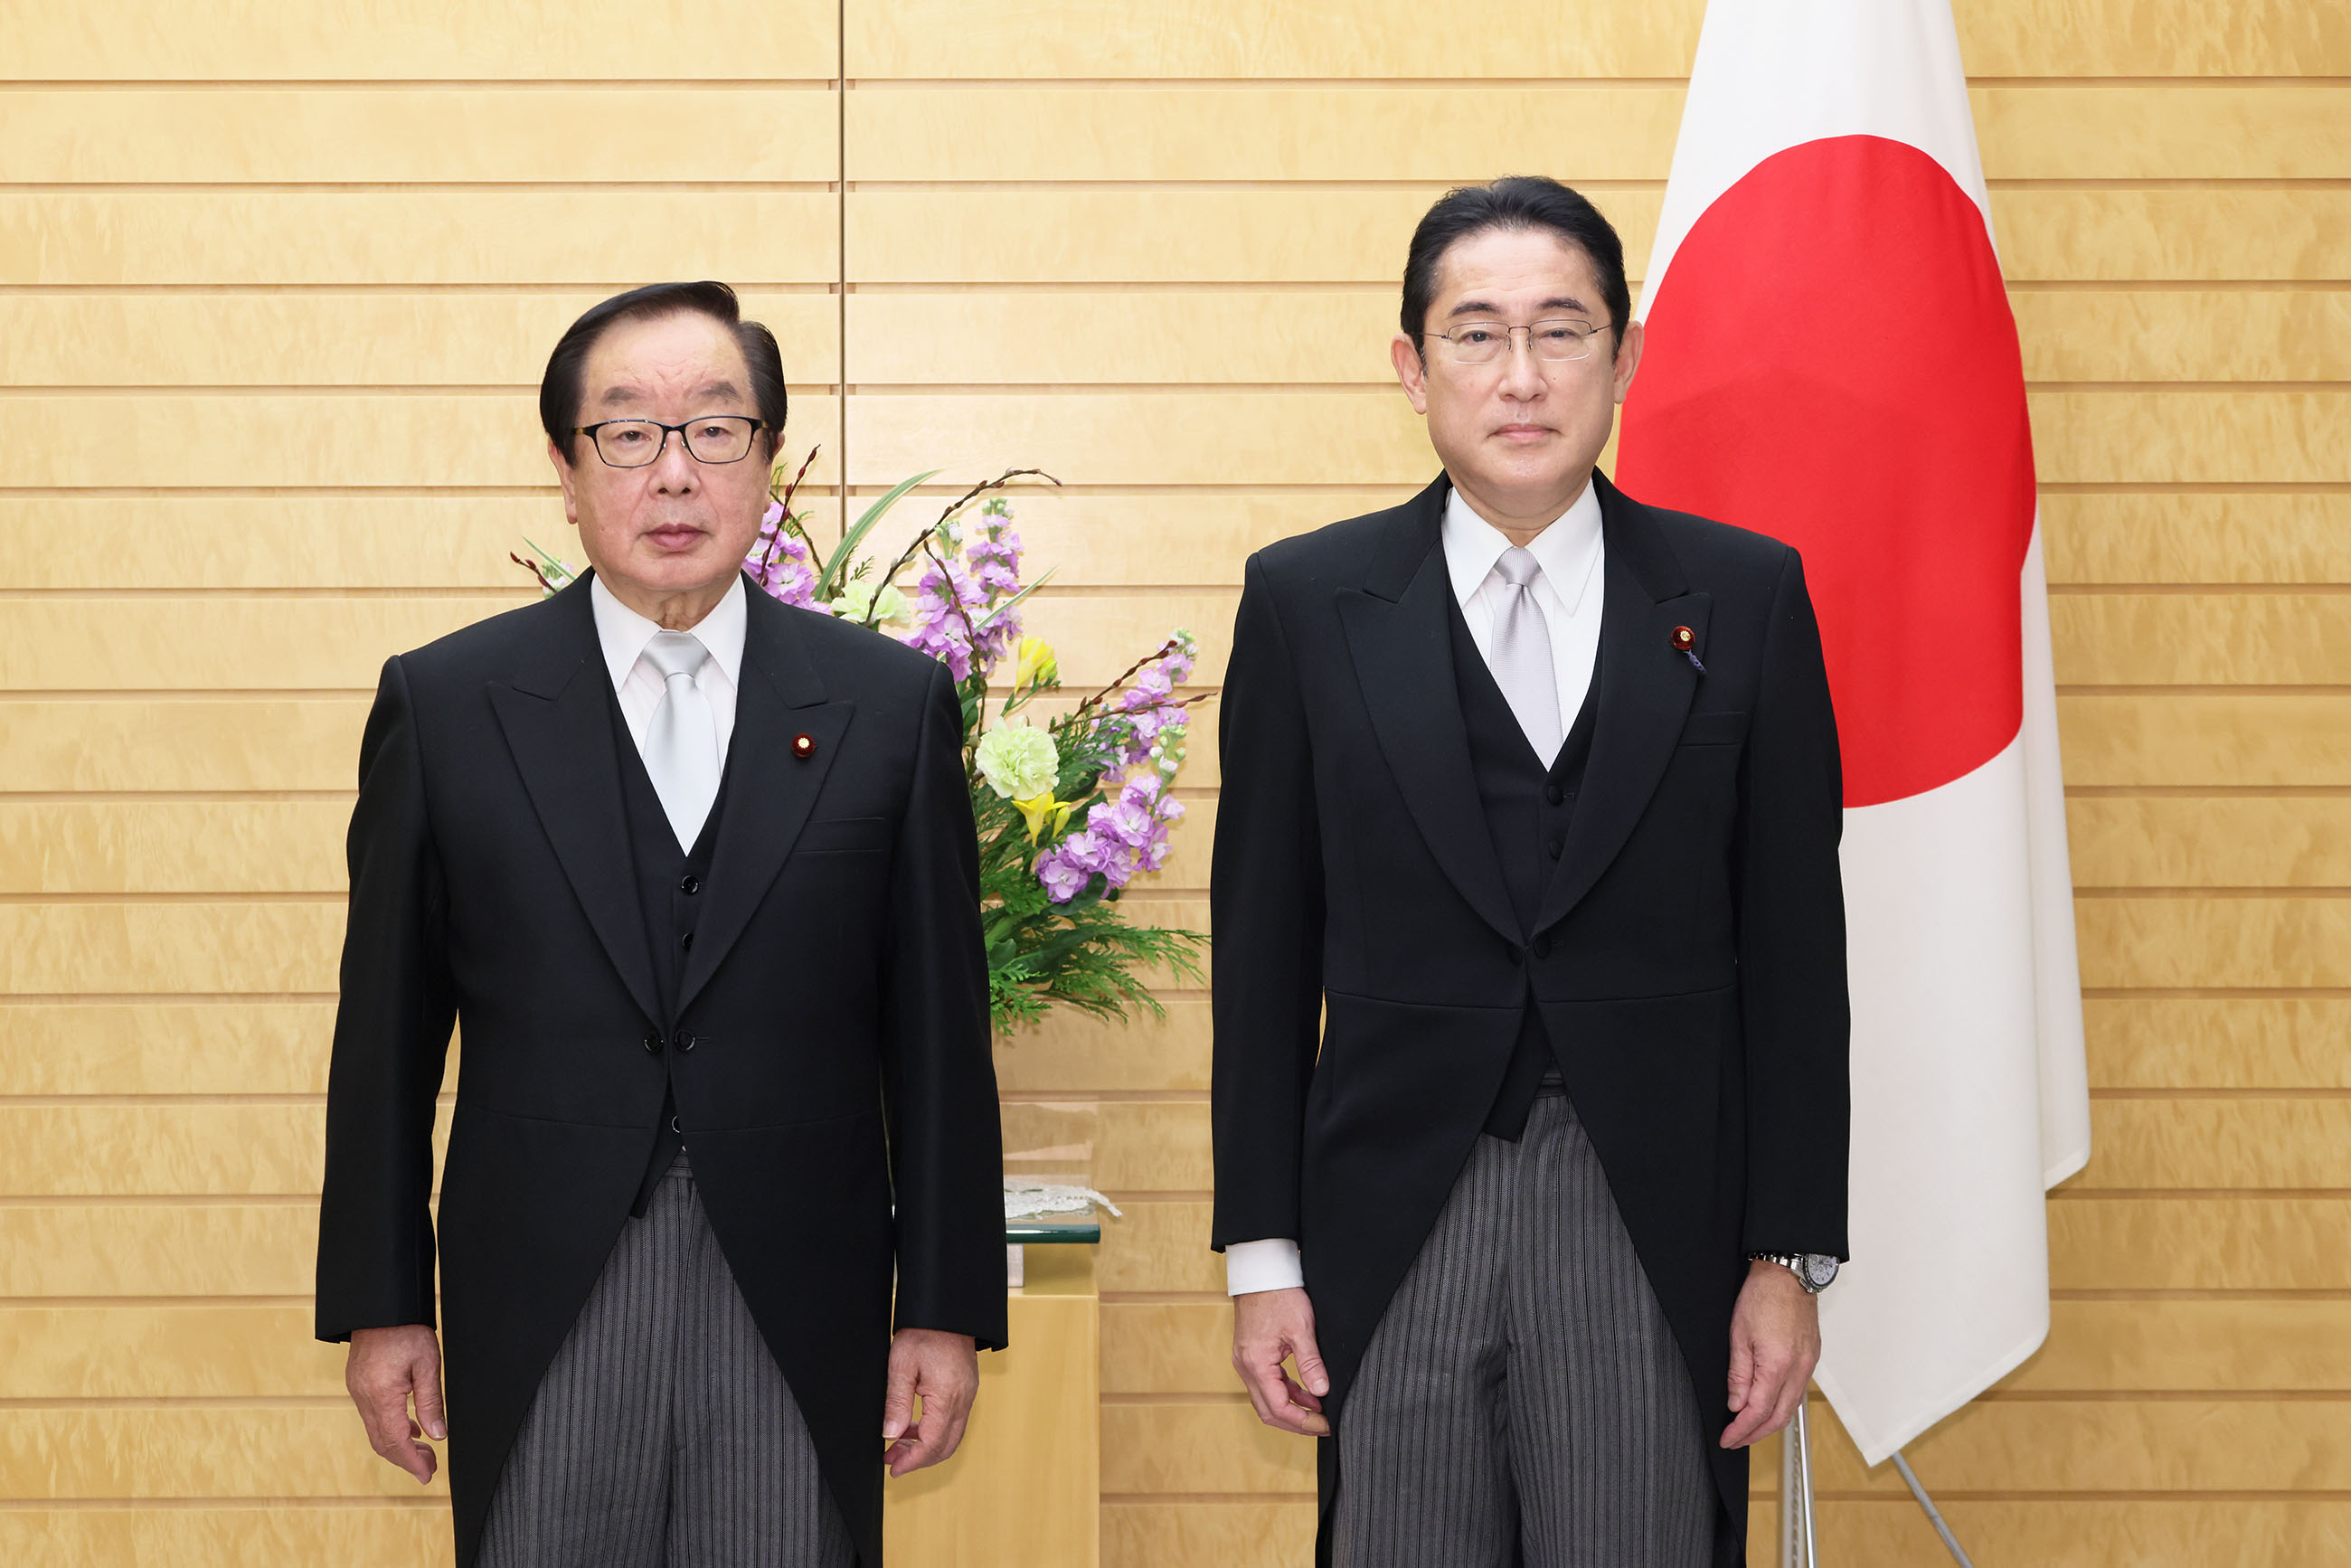 Prime Minister Kishida attending a photograph session with with the newly appointed Minister Watanabe (1)